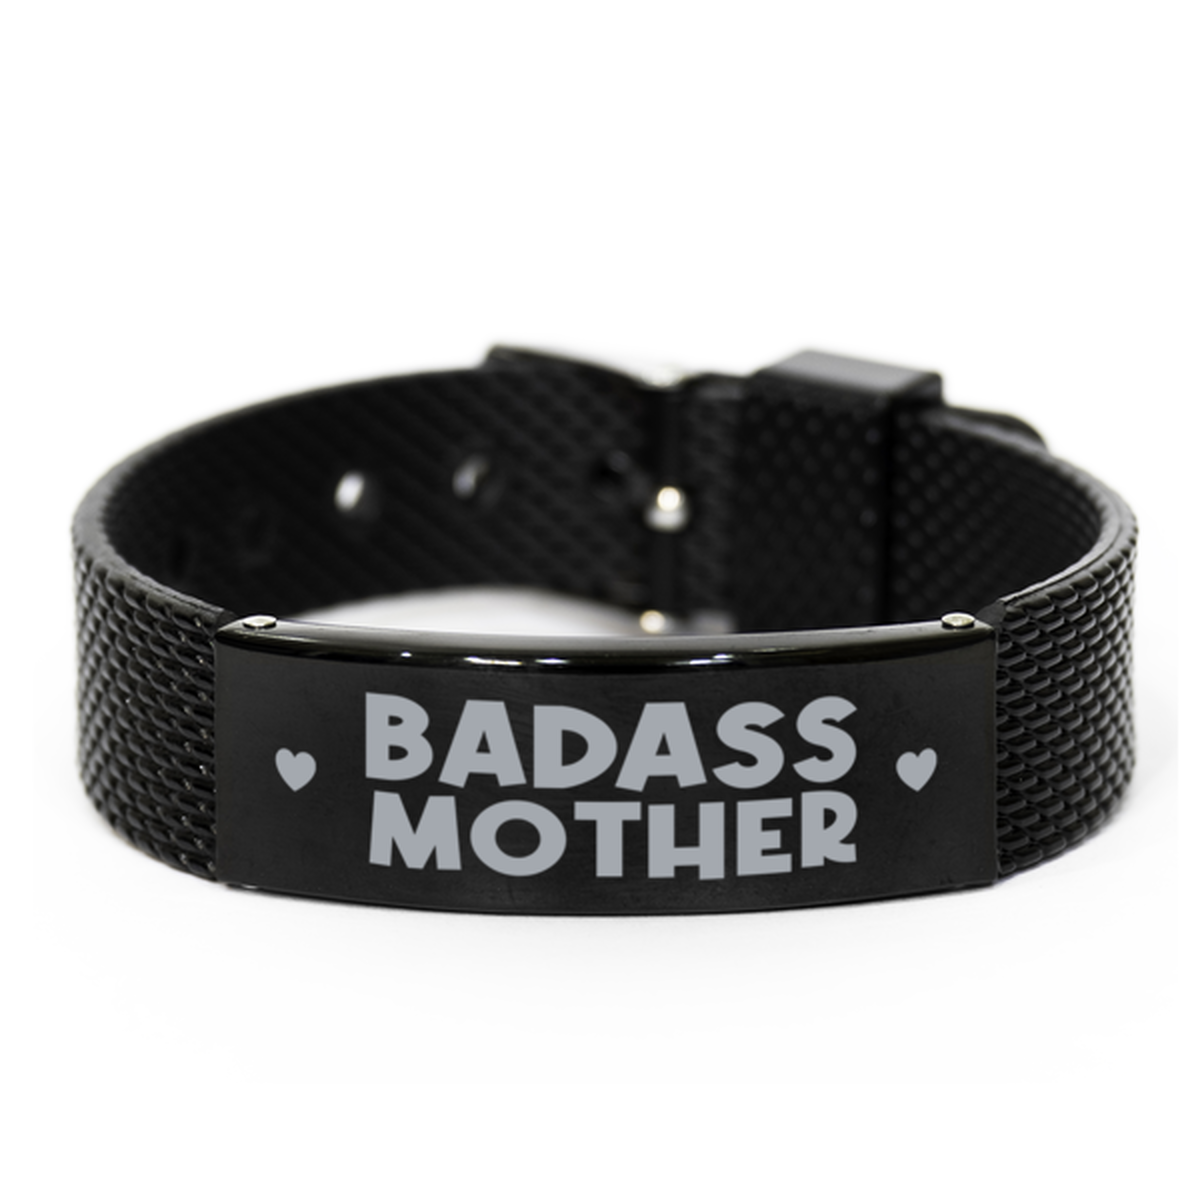 Mother Black Shark Mesh Bracelet, Badass Mother, Funny Family Gifts For Mother From Son Daughter